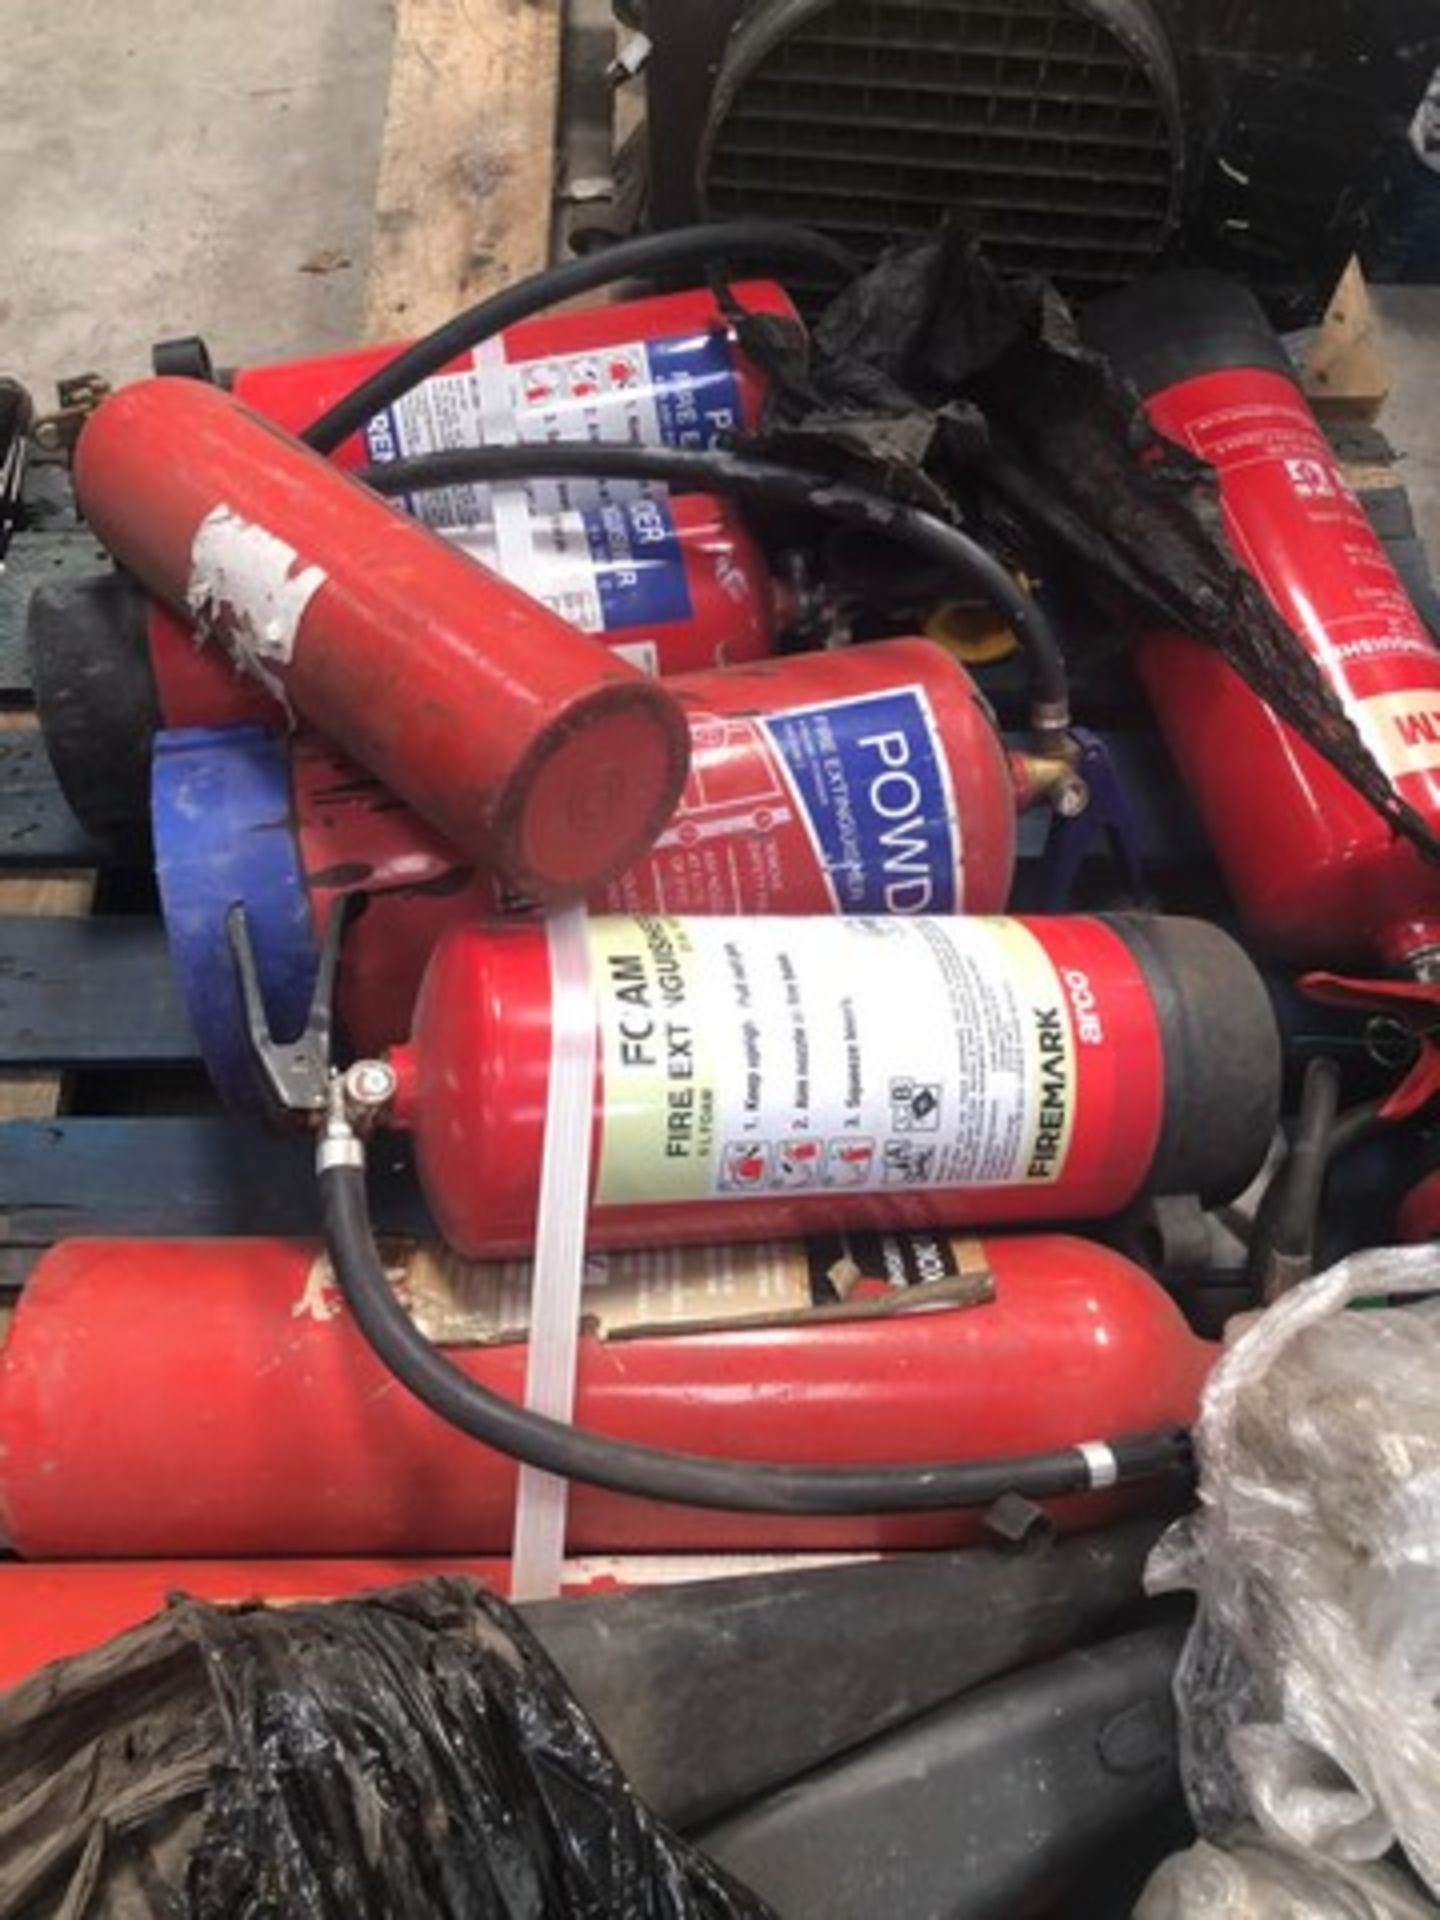 Mixed pallet of fire extinguishers approx 10